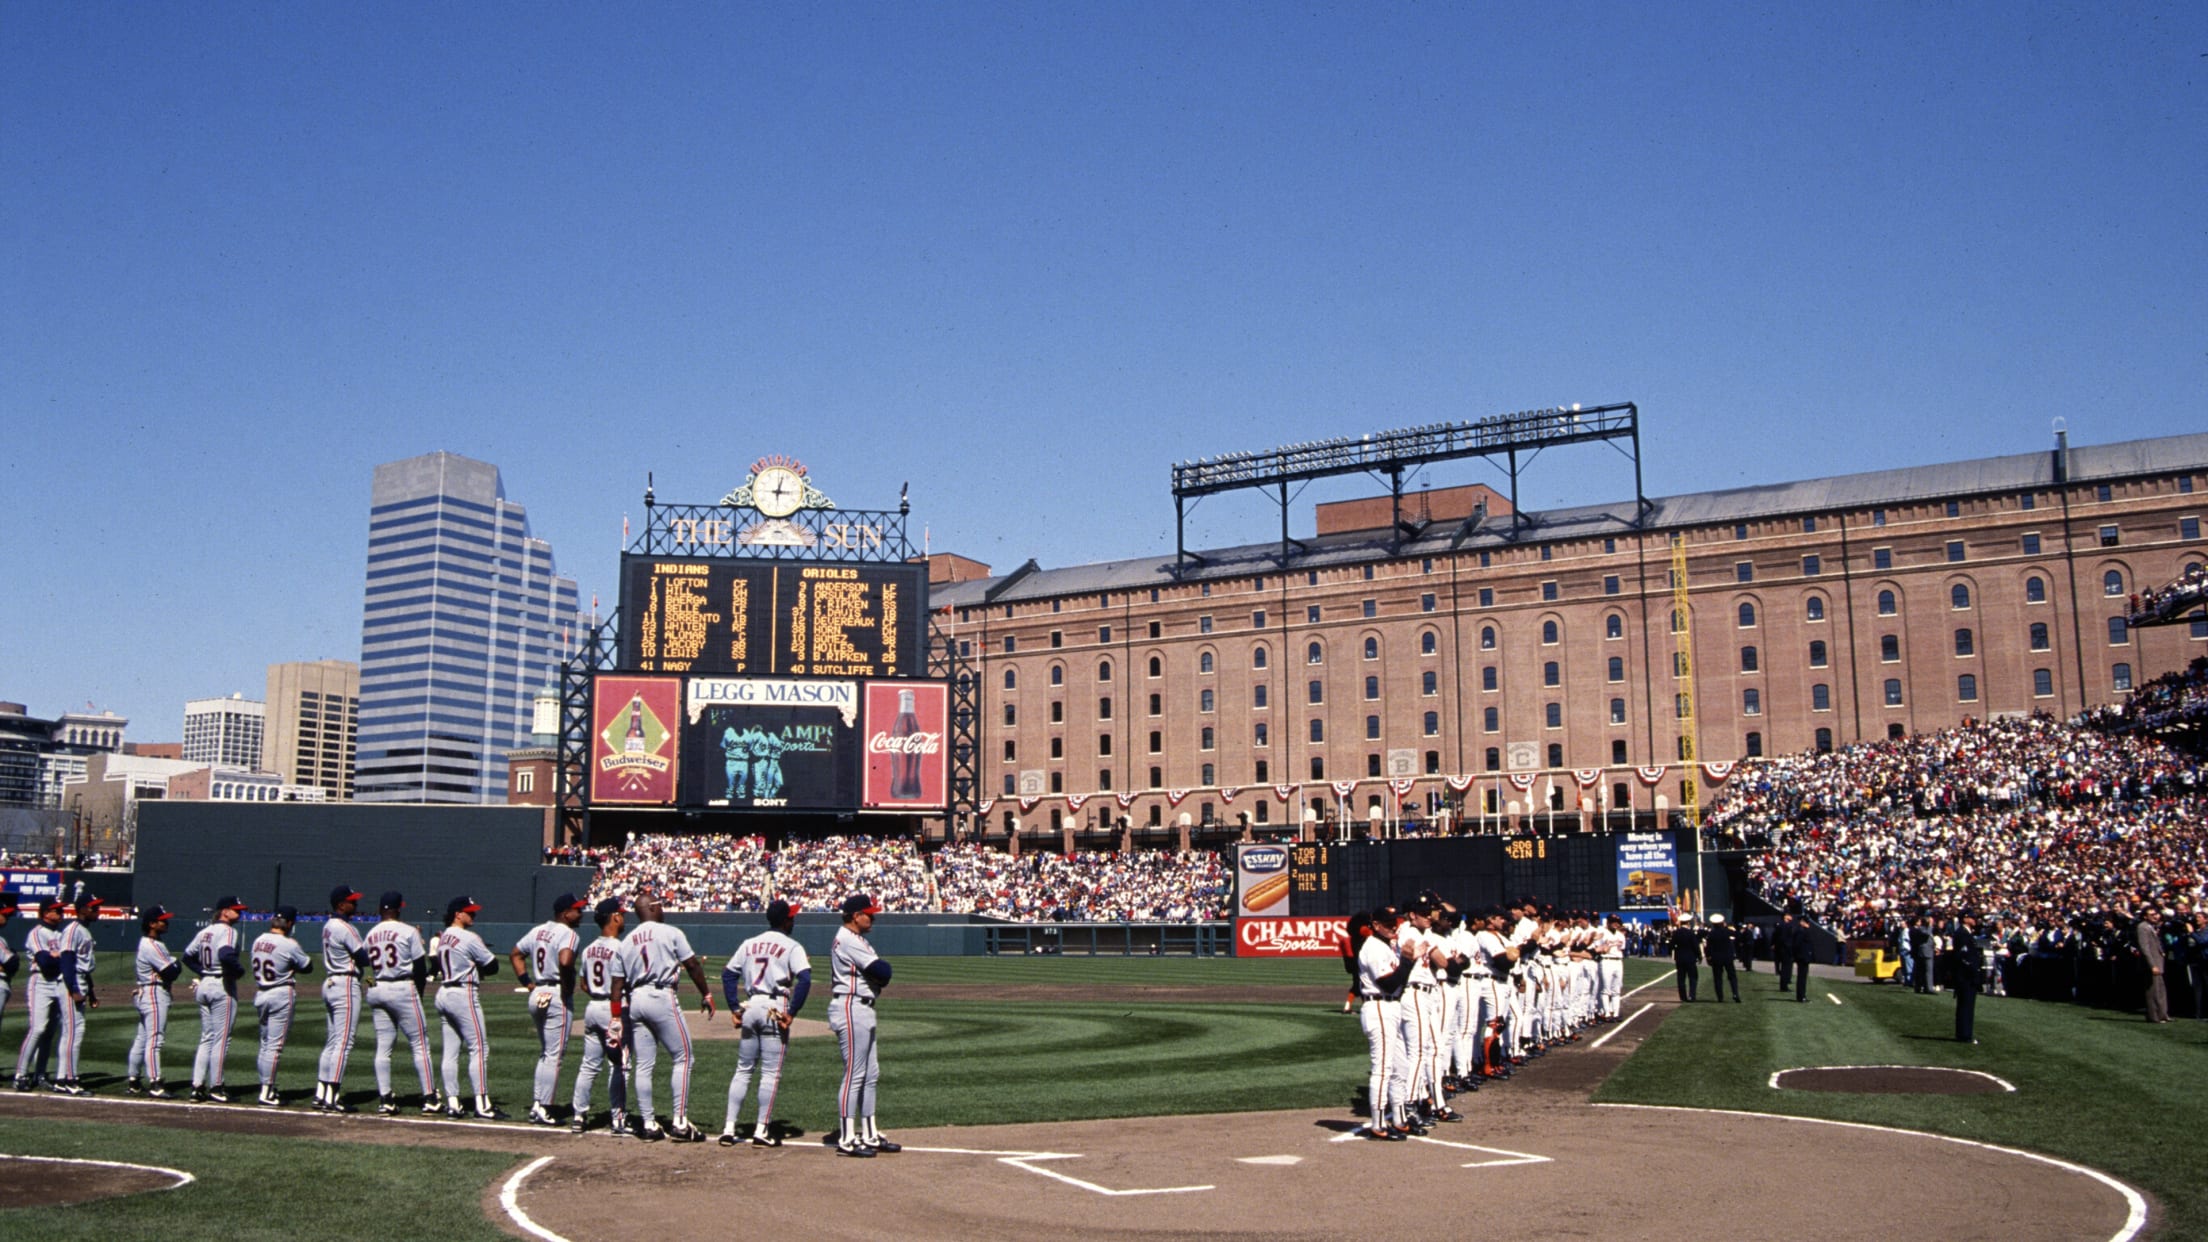 Capacity Restrictions Lifted At Orioles Park At Camden Yards - CBS